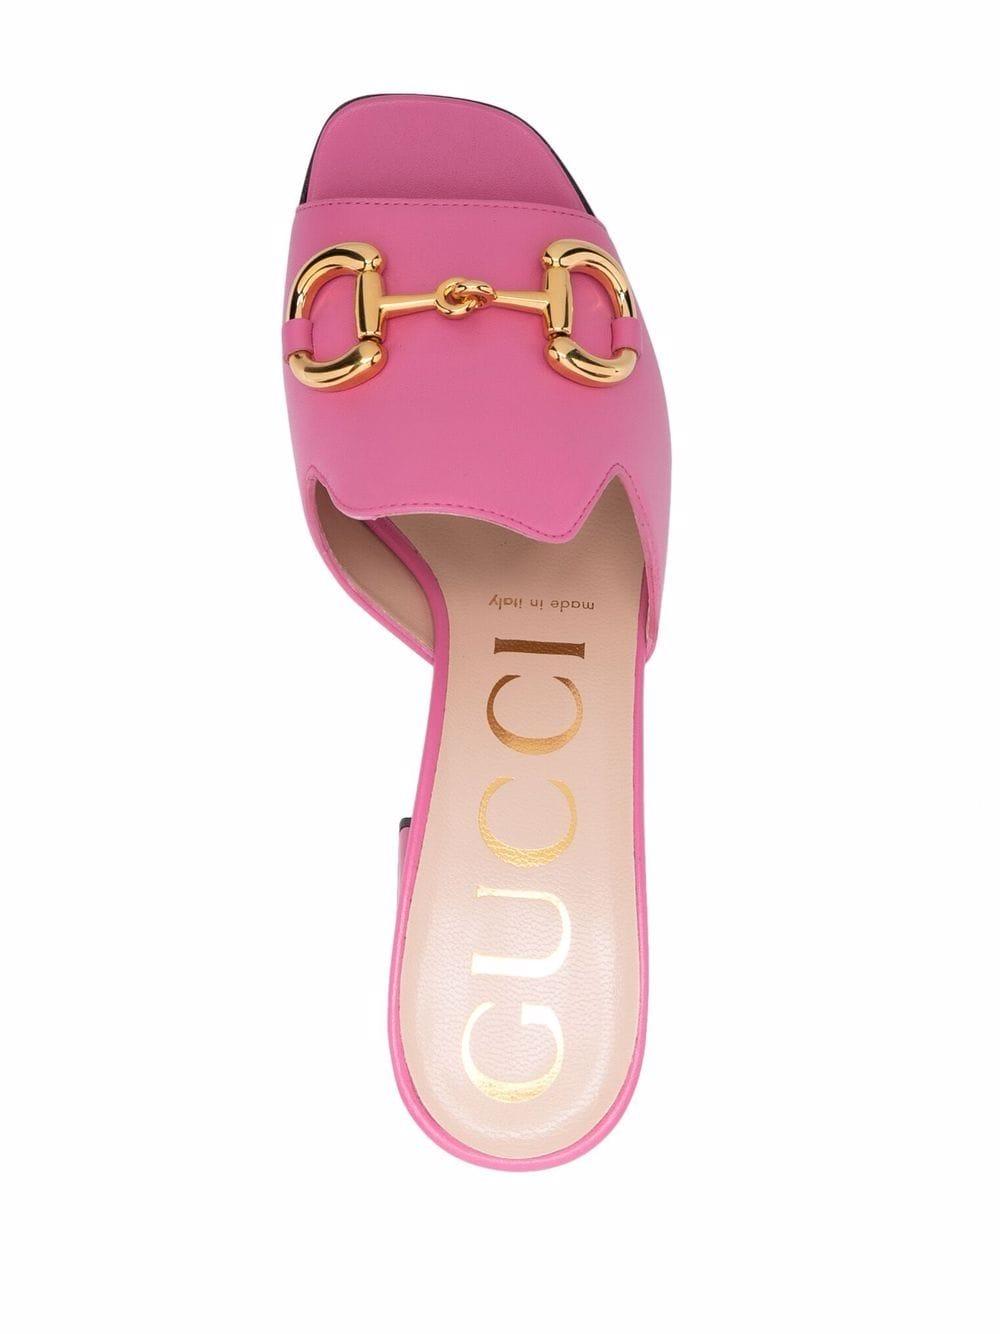 Gucci Leather Horsebit 75mm Mule Sandals in Pink | Lyst